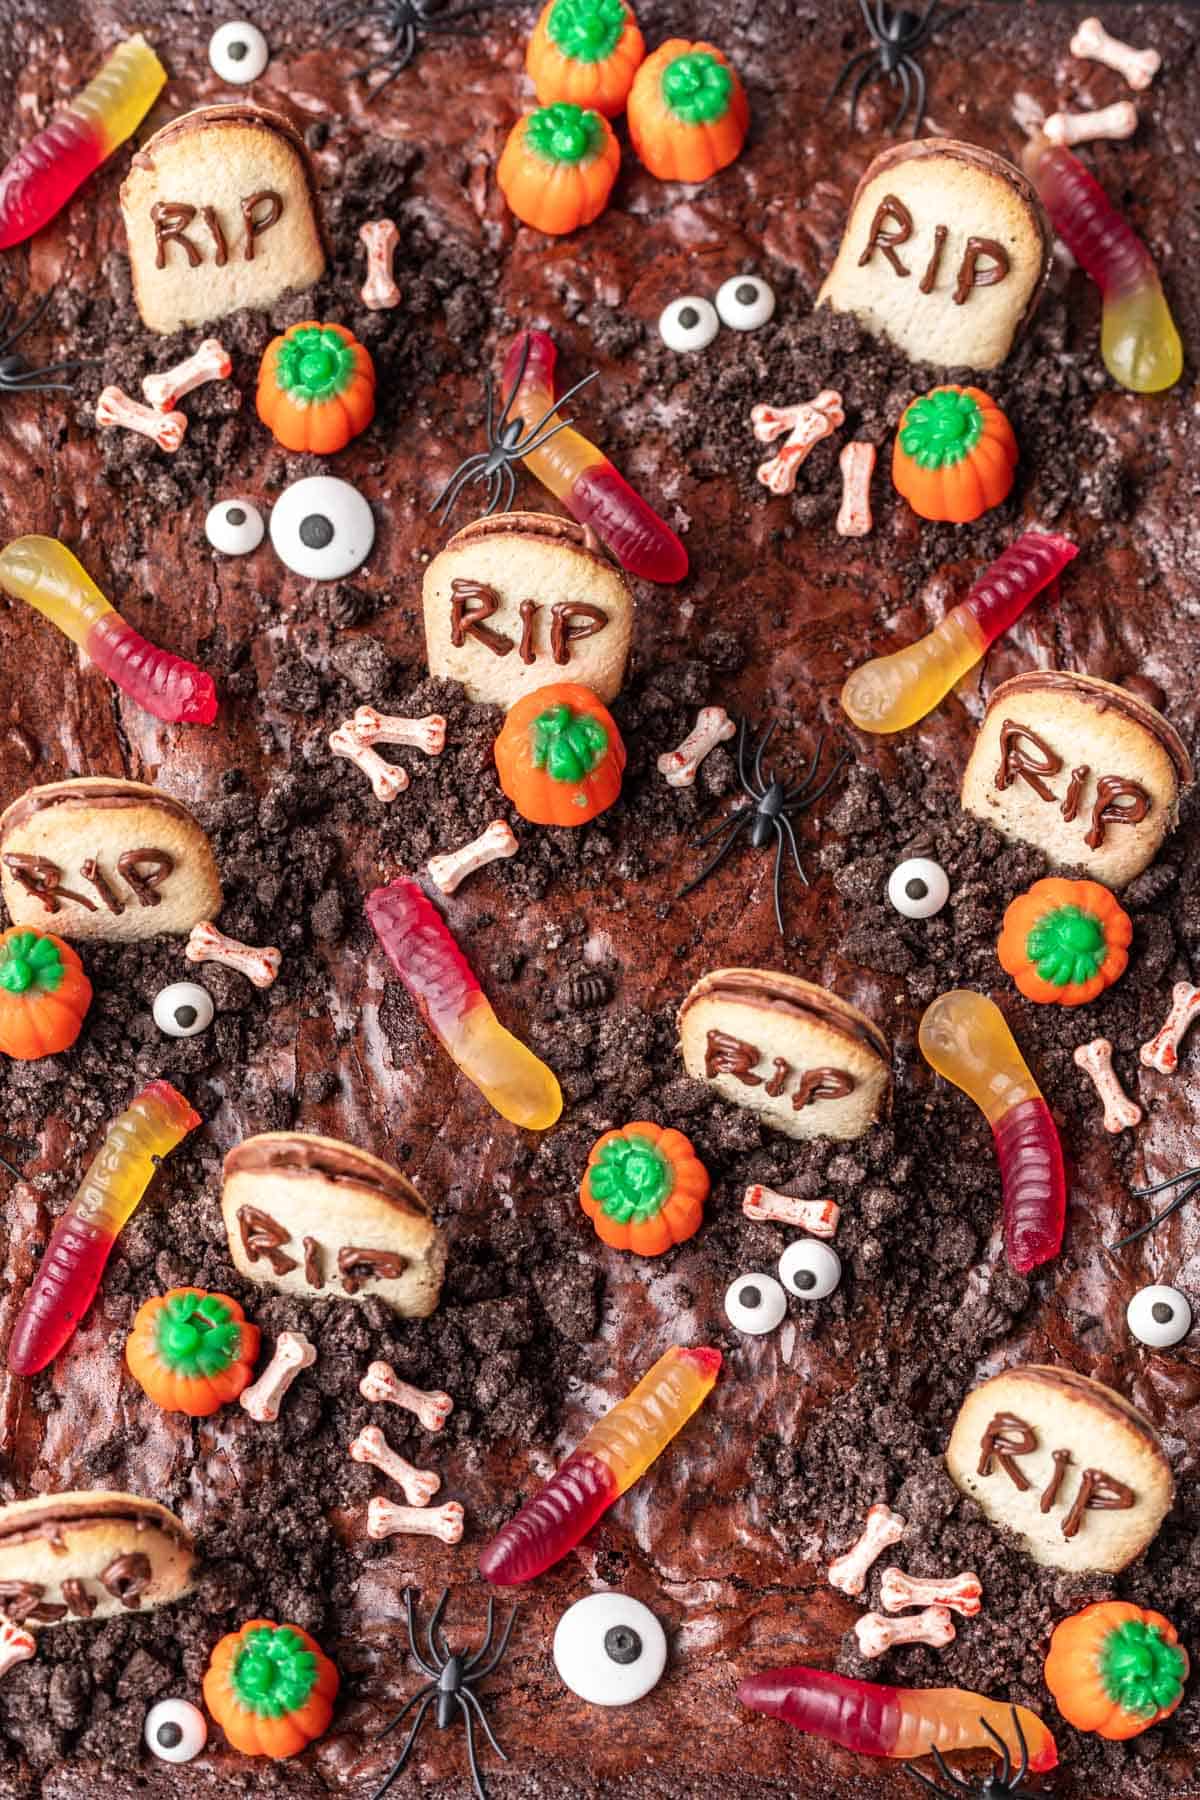 Birds eye view of graveyard brownies with tombstone cookies, candy bones, gummy worms, and oreo dirt.